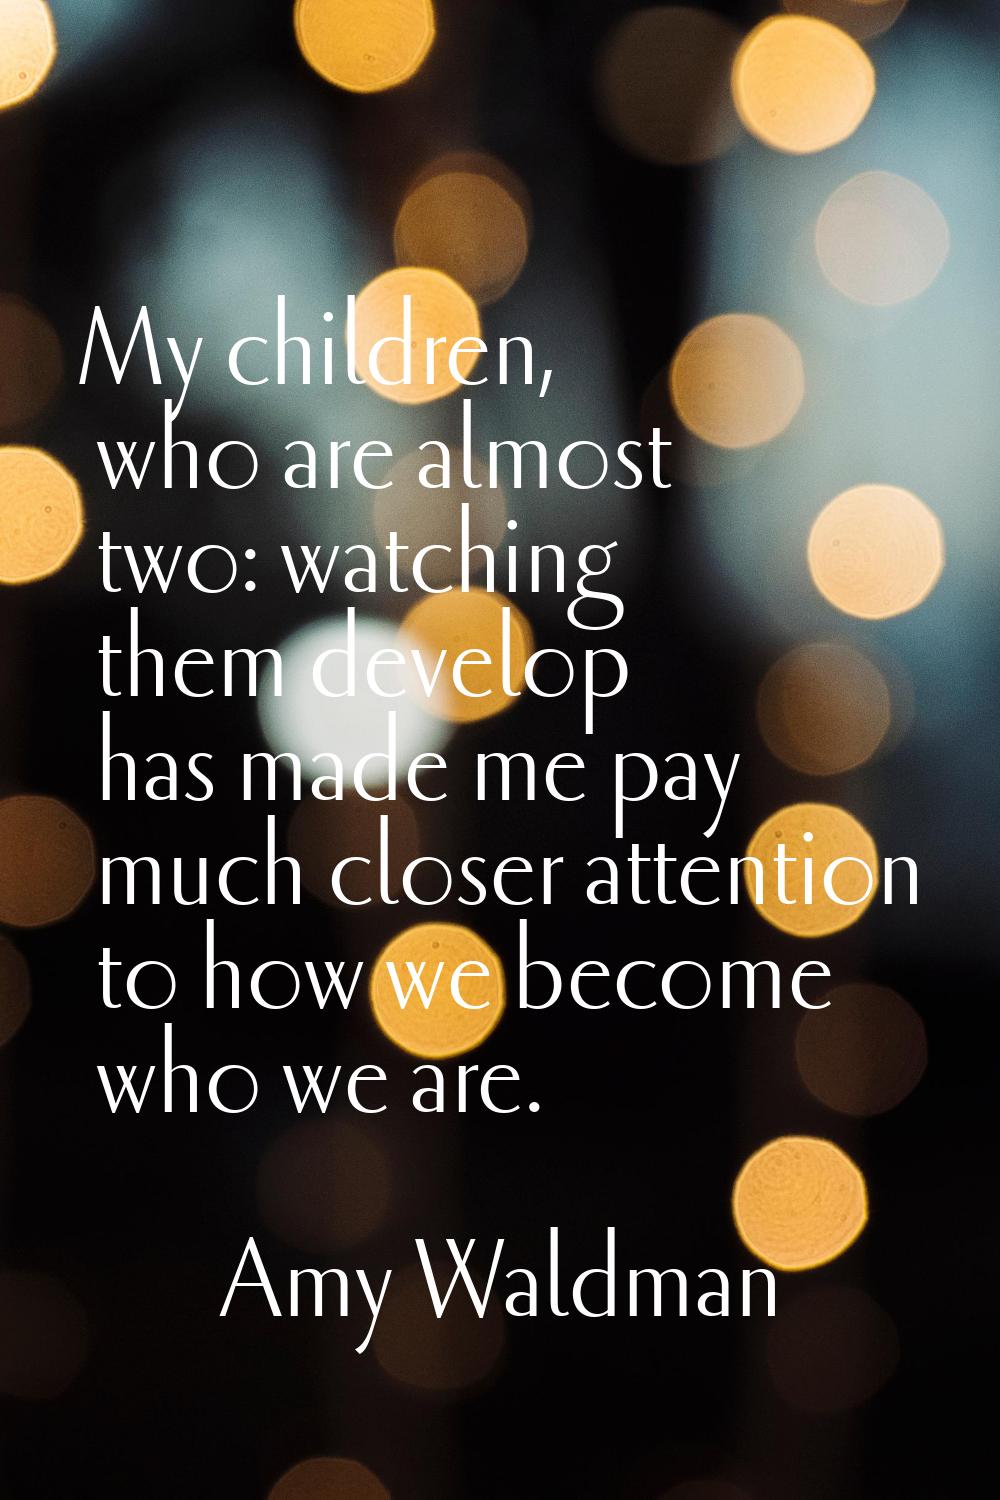 My children, who are almost two: watching them develop has made me pay much closer attention to how